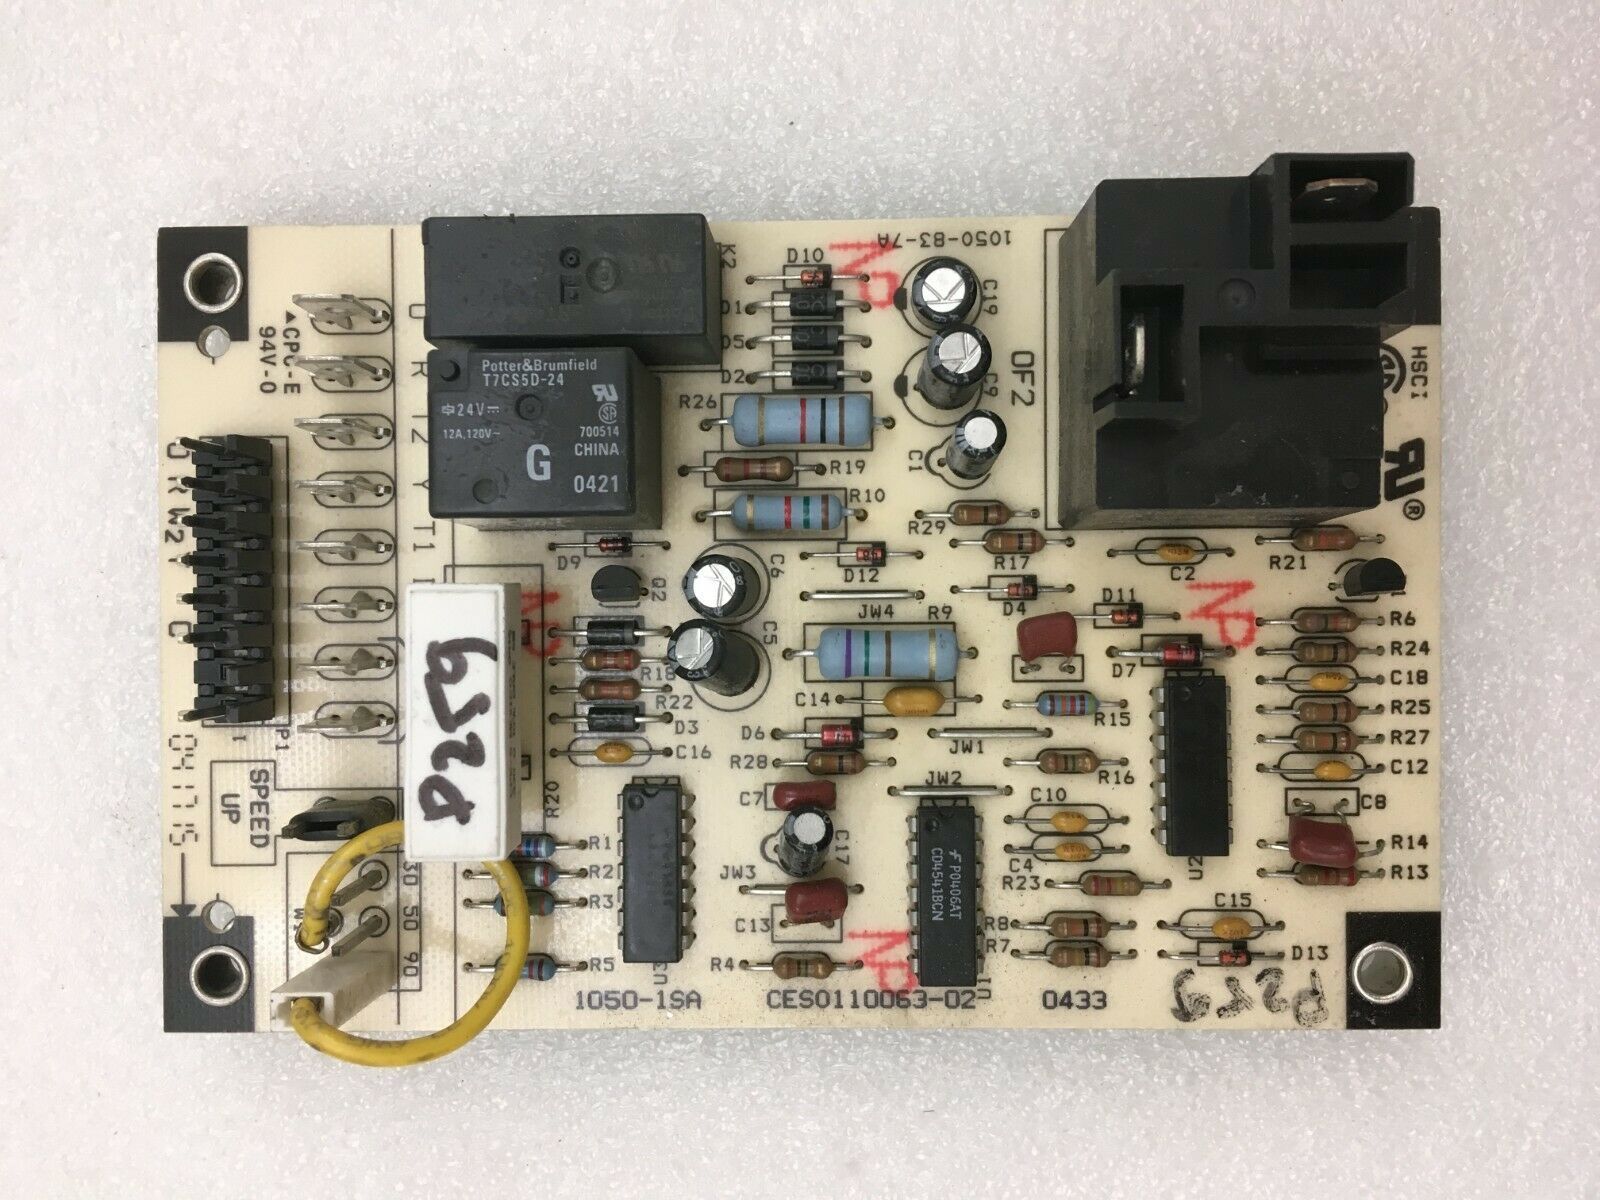 Carrier Bryant Payne CESO110063-02 Defrost Control Circuit Board 1050-83-6A 